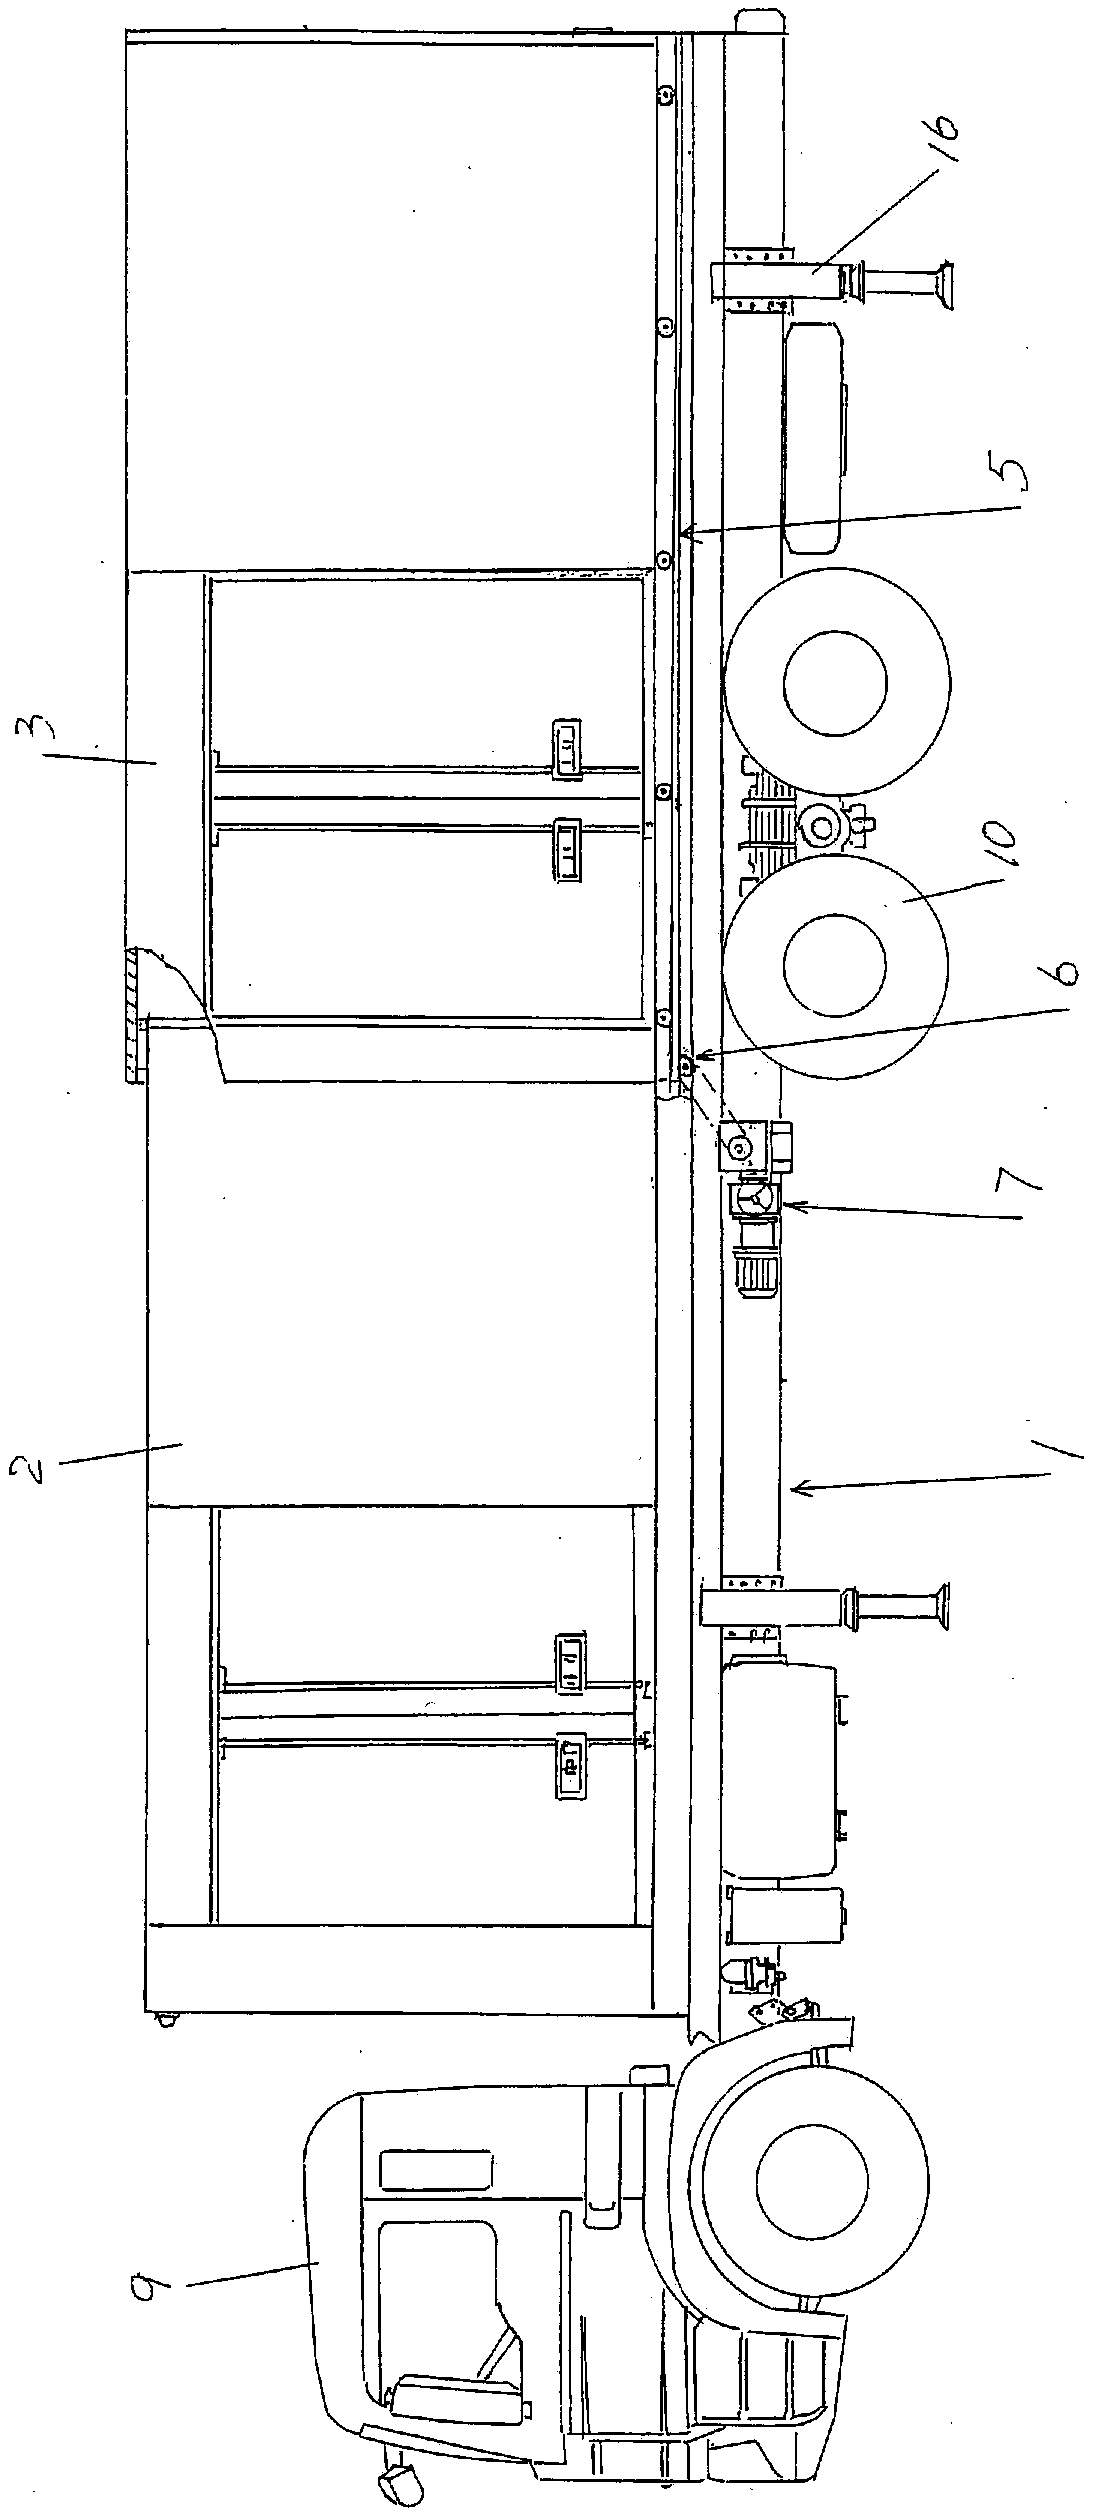 Telescoping body structure for vehicles